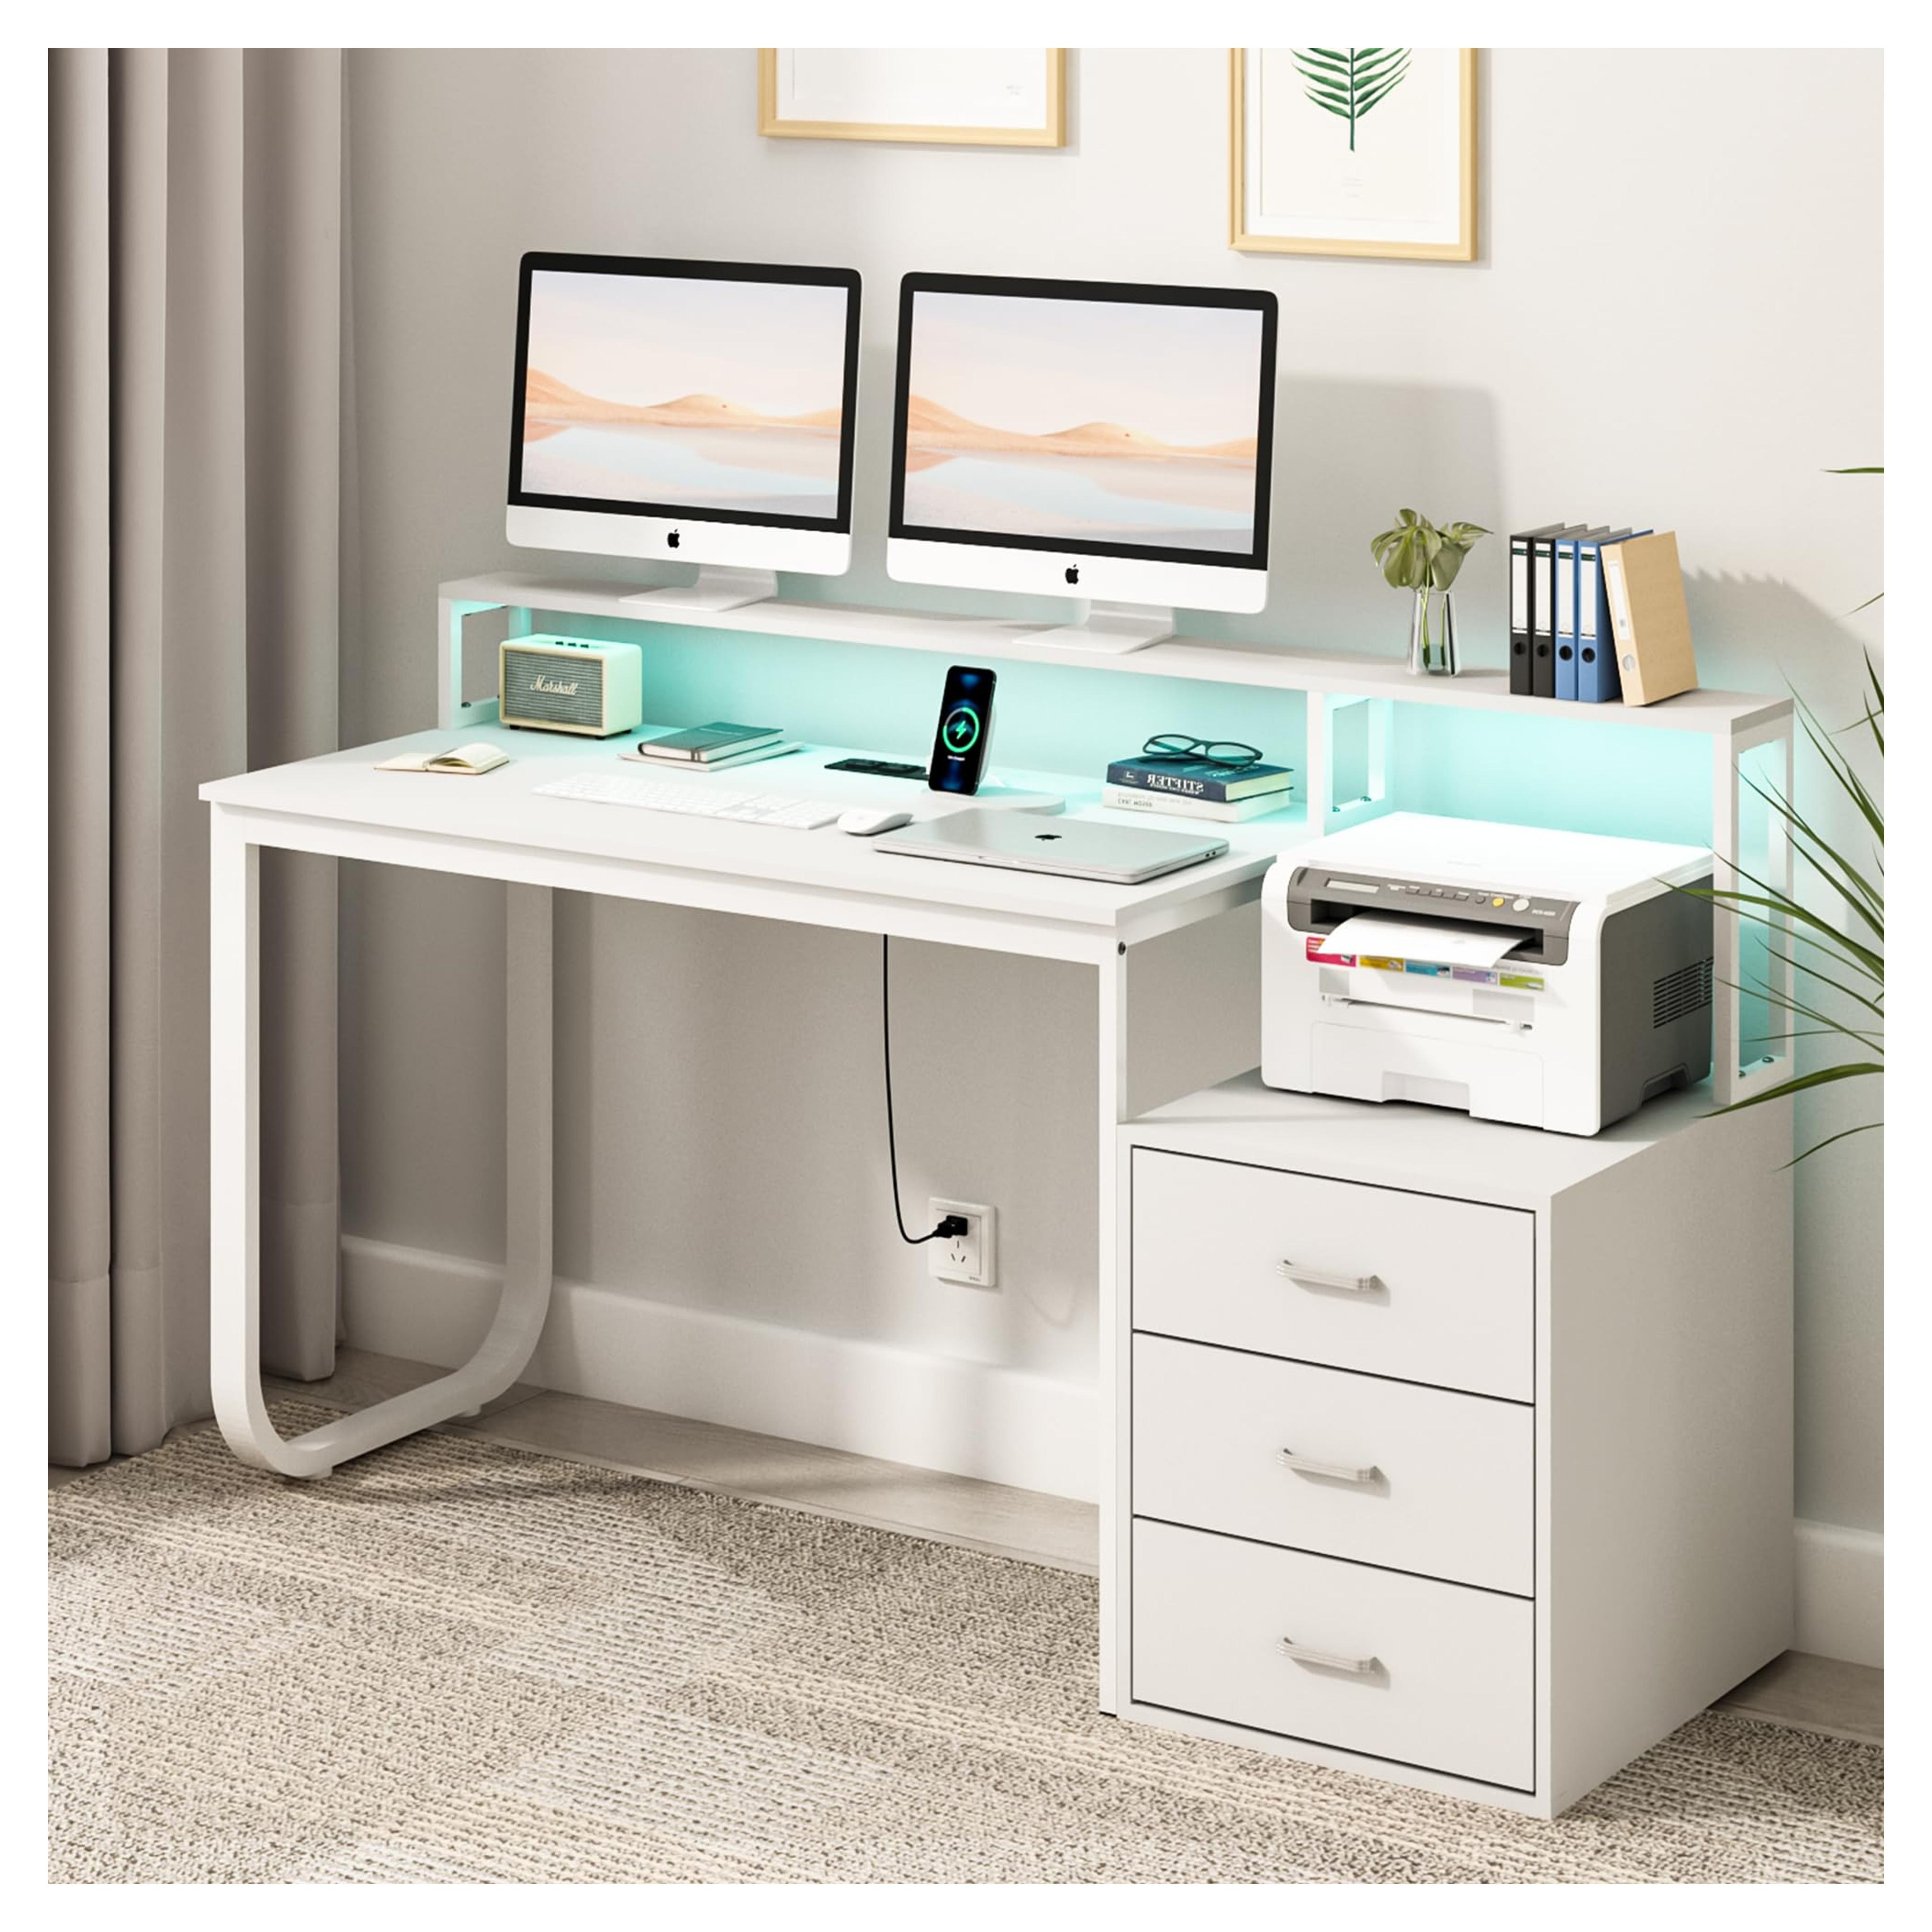 HOMBCK 67” White Desk with 3 Drawers and Storage, Reversible White Office Desk Computer Desk with Power Outlet and Monitor Stand, Home Office Desk with LED Strips for Bedroom